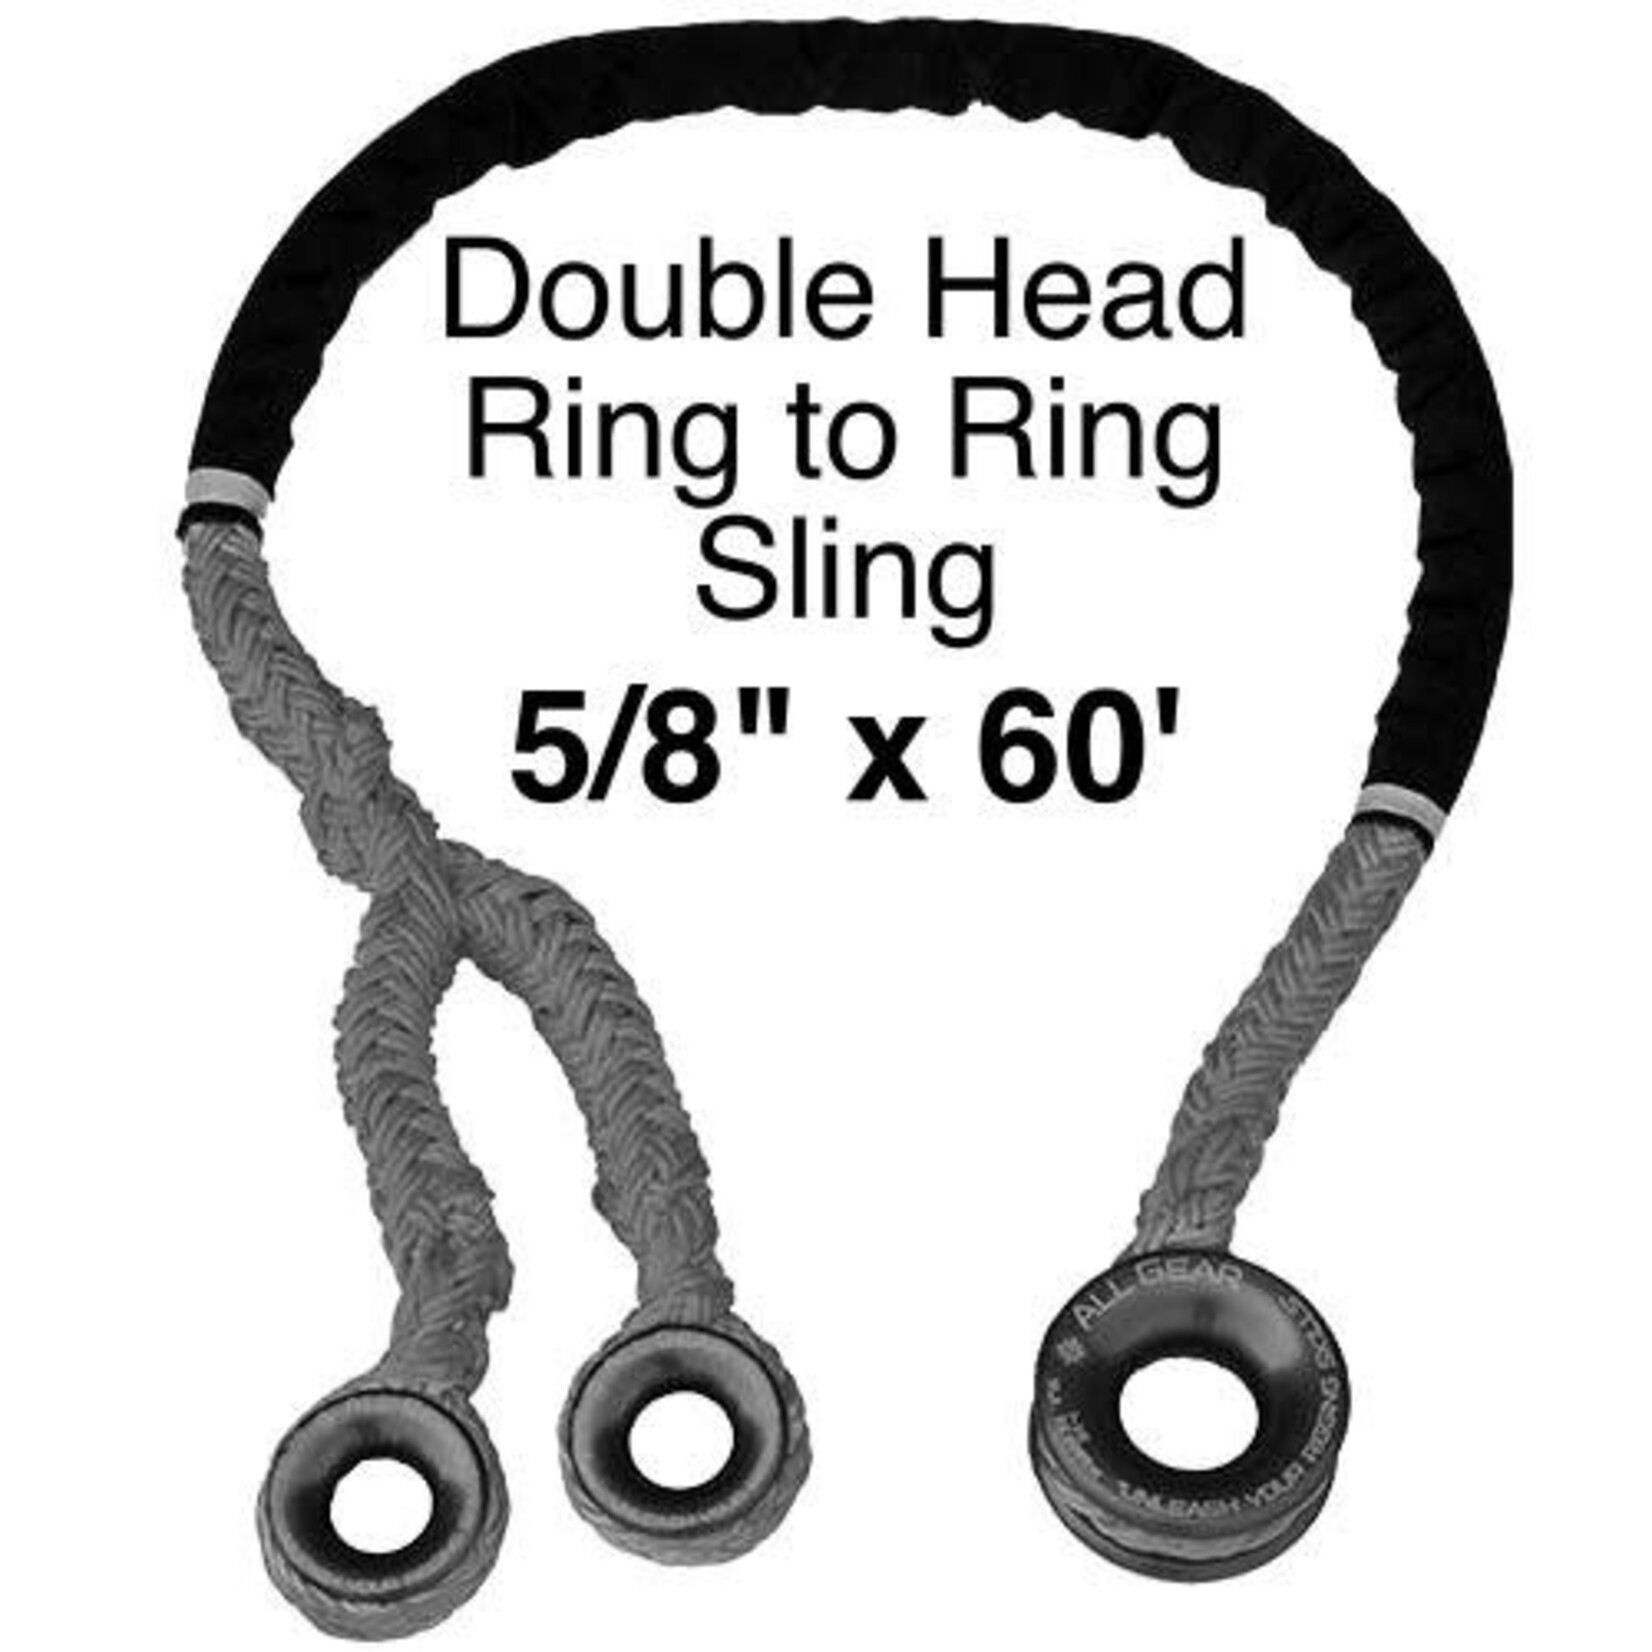 All Gear Inc. 5/8" x 60' Ring To Ring Sling with Double Head.16,000 Lb.